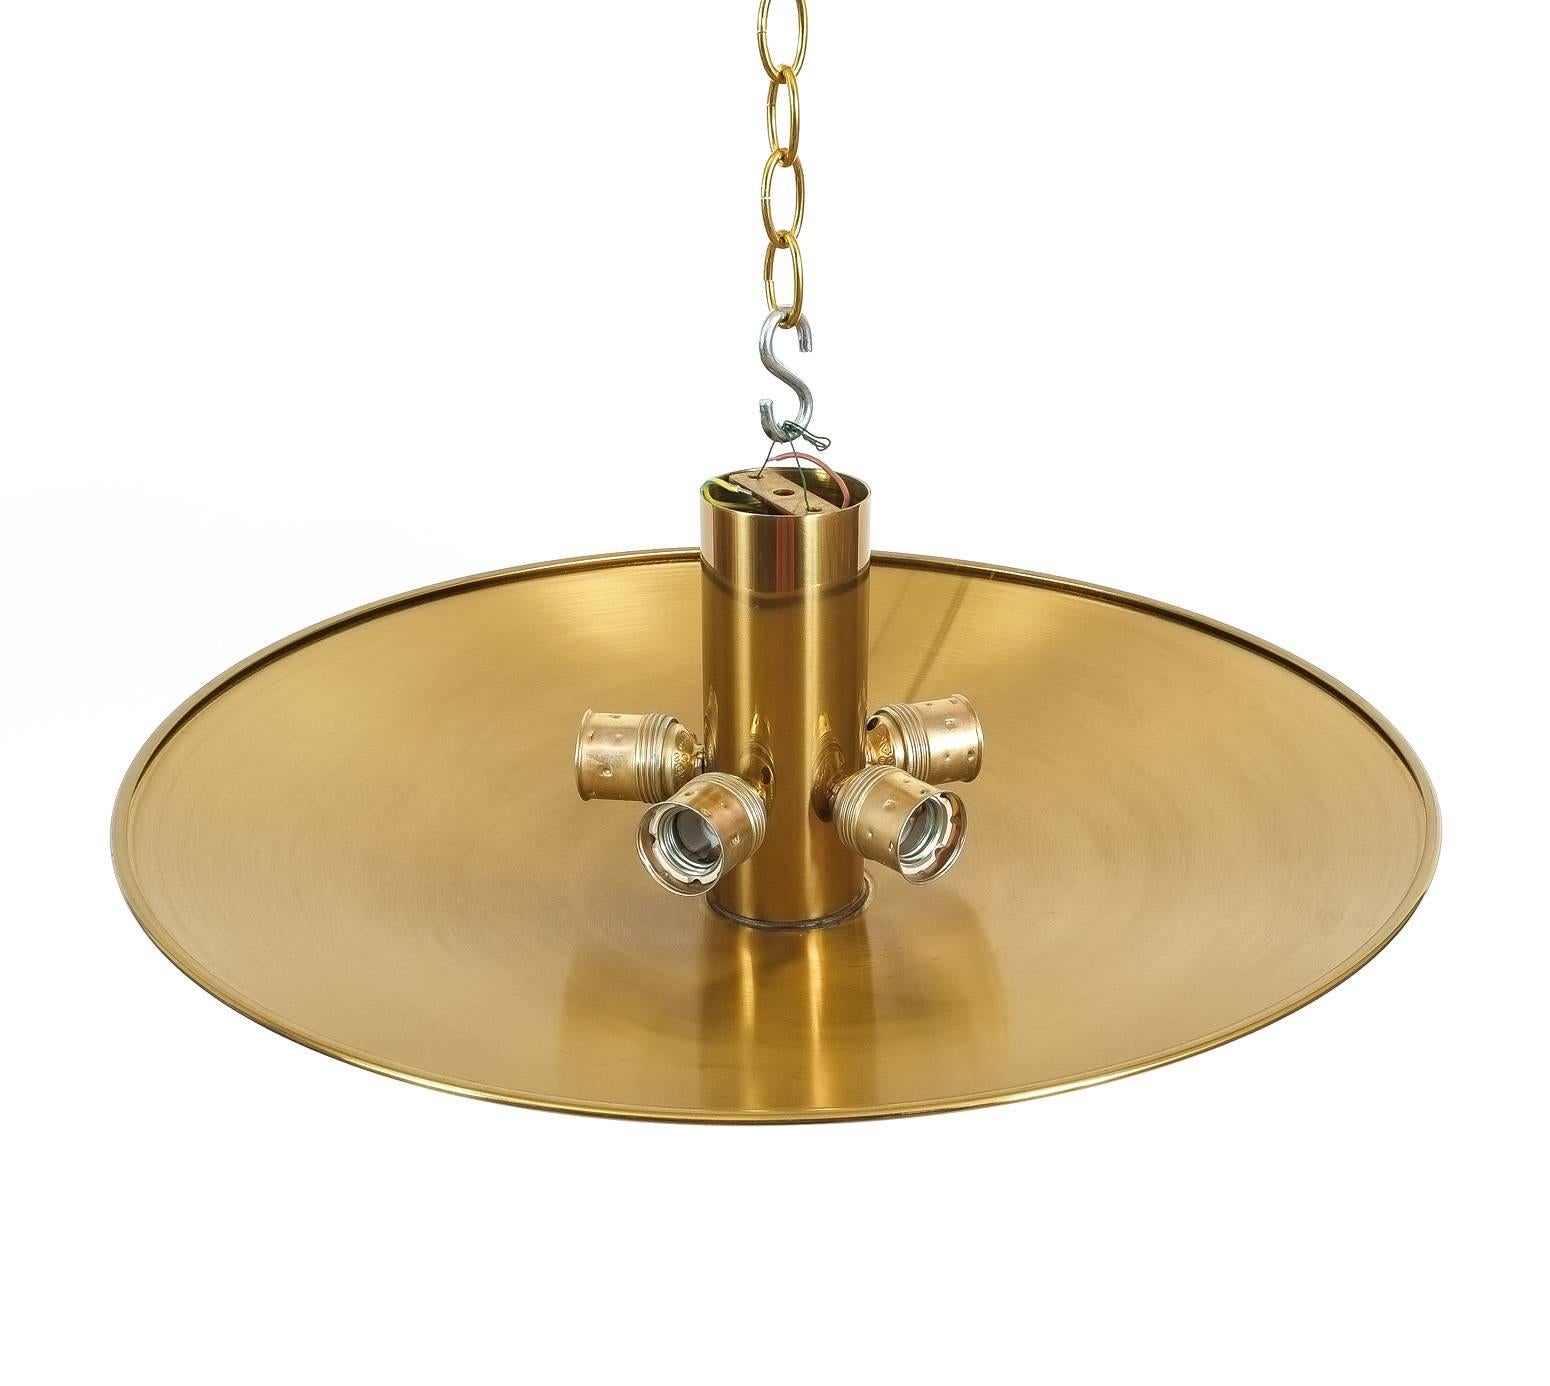 J.T Kalmar large golden brass flush mount or ceiling lamp, Austria circa 1960. Beautiful 21.65 inch dish flush mount by J.T Kalmar. The ceiling fixture consists of polished golden patinized brass, which was then treated against tarnishing. It holds